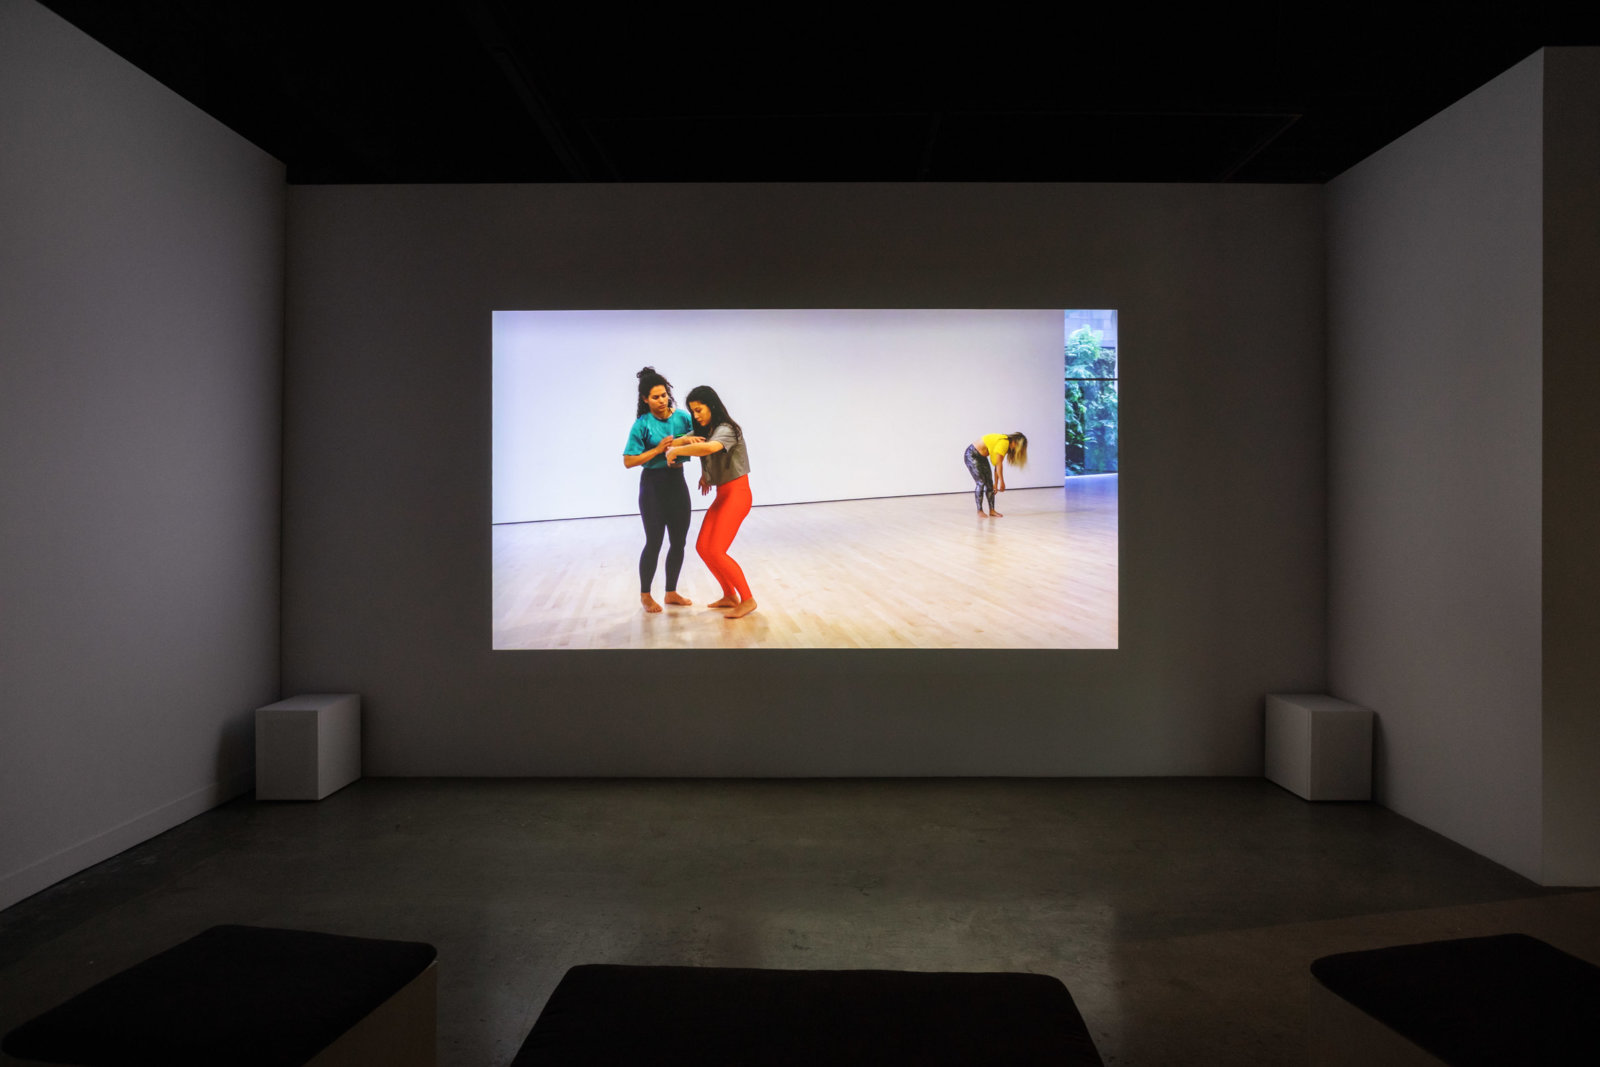 Tanya Lukin Linklater, An amplification through many minds, 2019, video, 36 minutes, 32 seconds. Installation view, My Mind Is With The Weather, Oakville Galleries, Canada, 2022